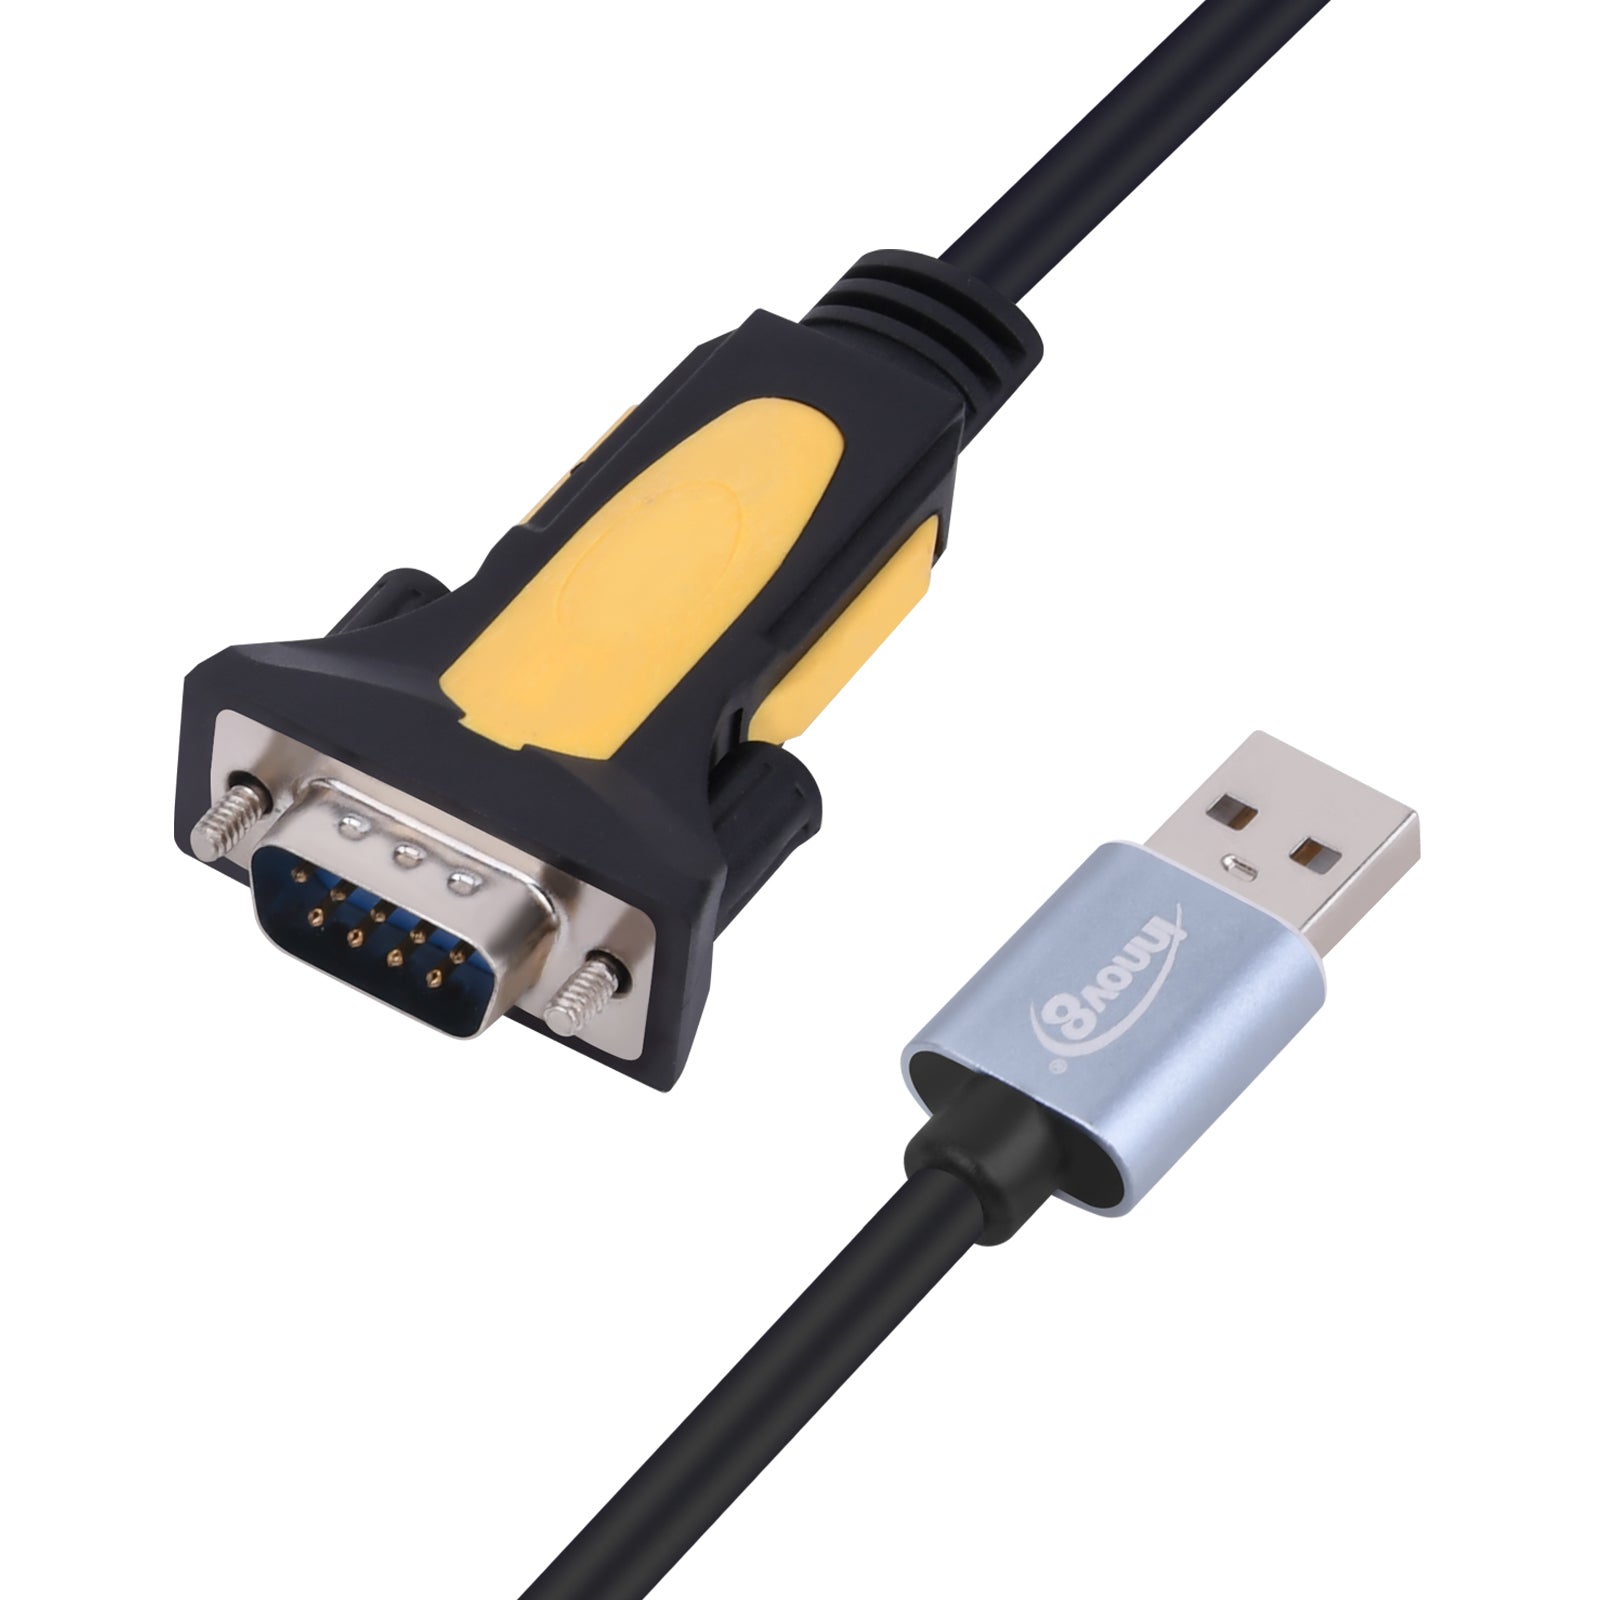 USB 2.0 to RS232 DB9 Serial Cable For Routers, GPS, Barcode Scanners, POS 1.5m